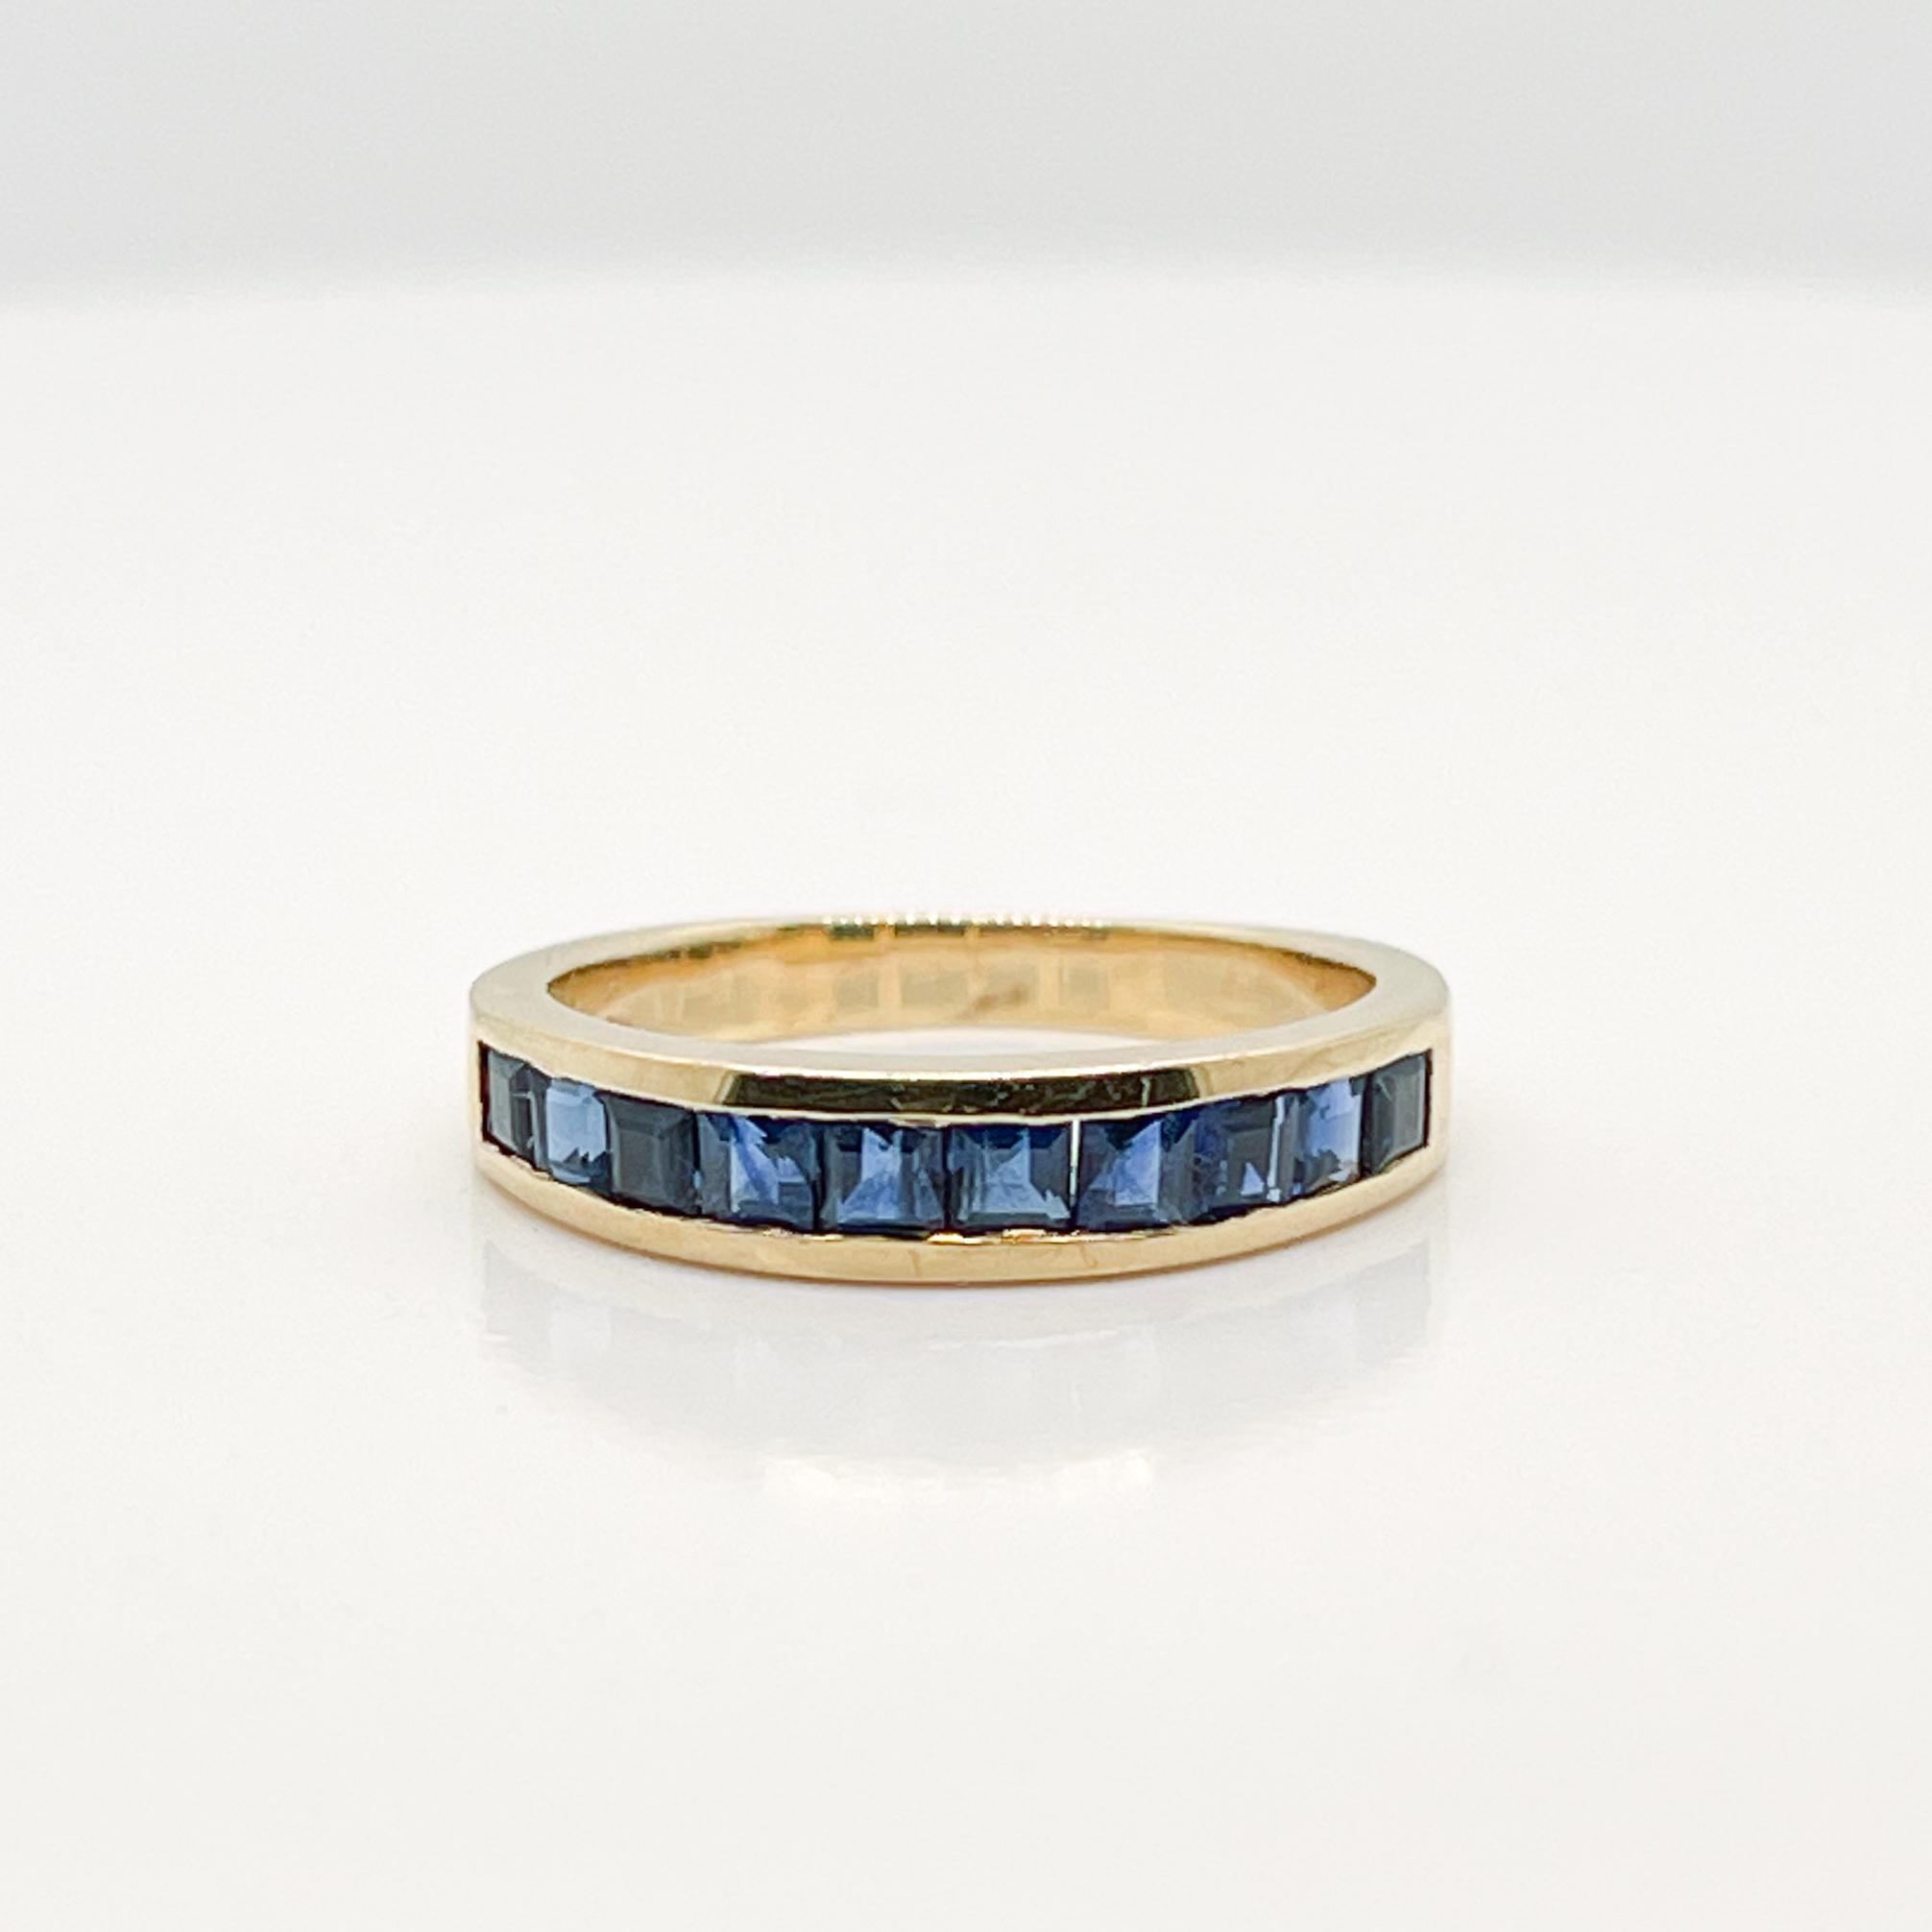 A very fine gold & sapphire half eternity band ring.

By Tiffany & Co. 

In 18 yellow gold.

With channel set square-cut faceted sapphires to the top and a solid band to the reverse.

Simply a wonderful ring by Tiffany & Co.!

Date:
20th